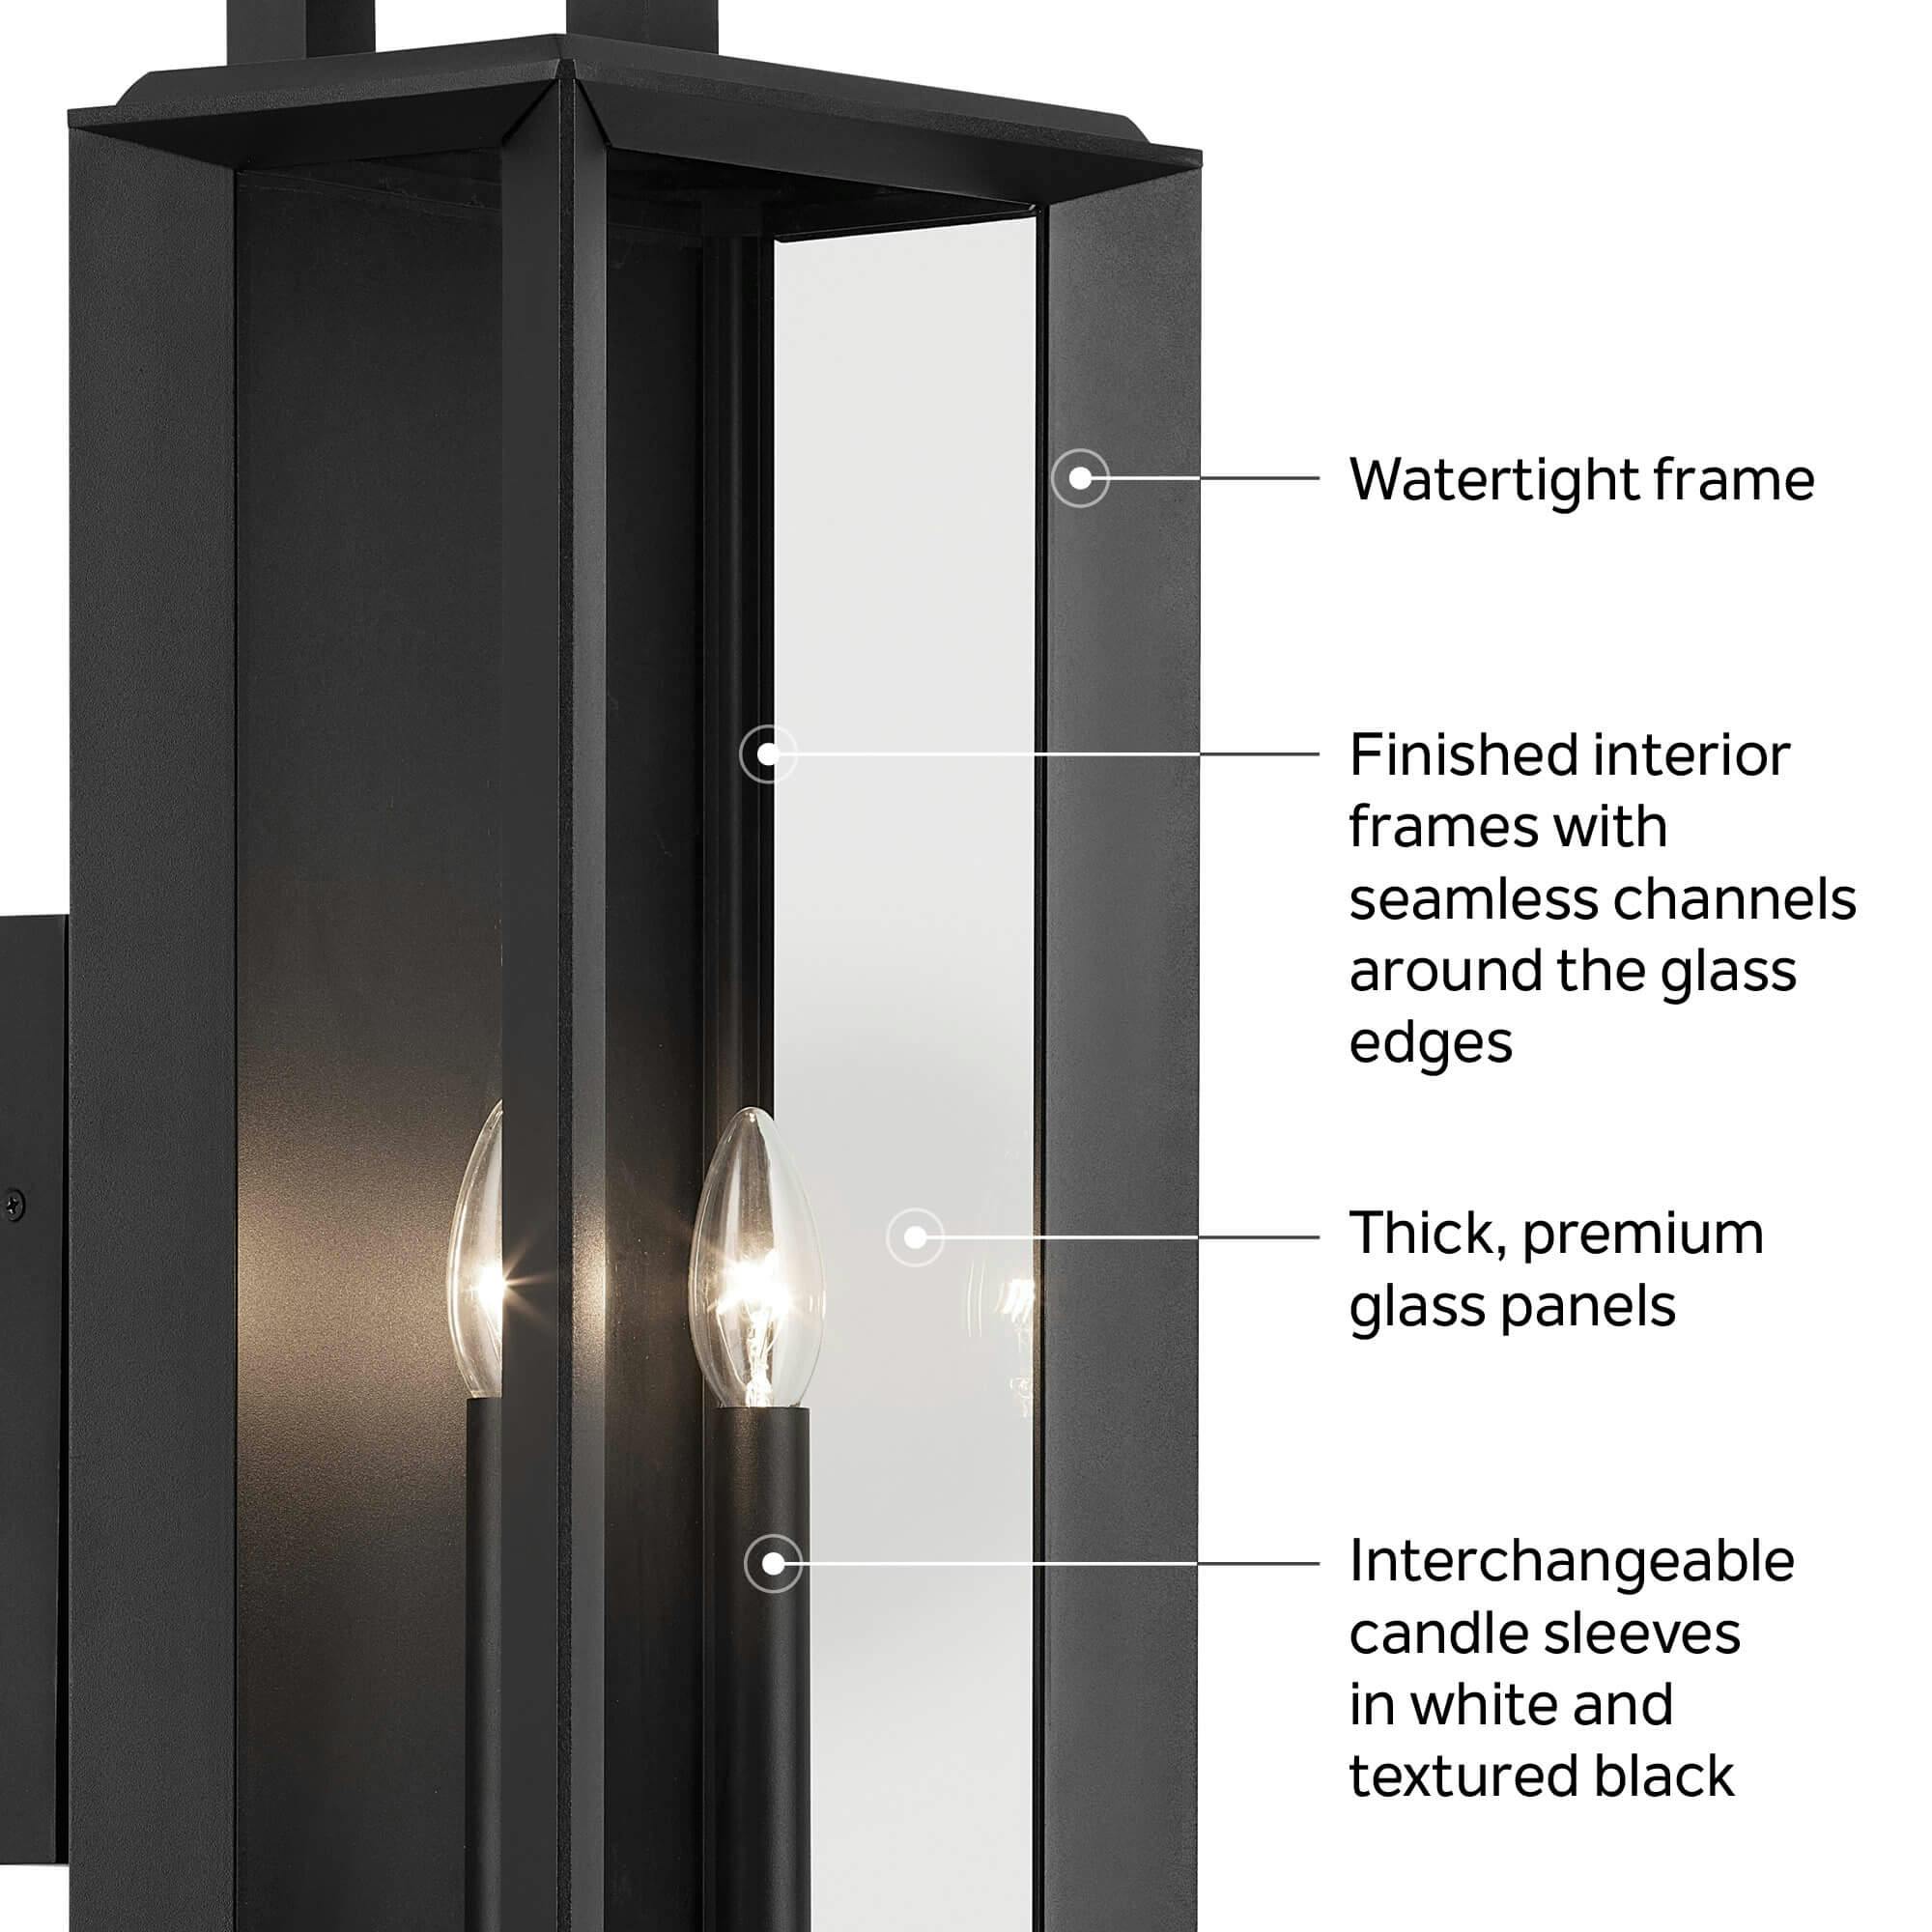 Kroft outdoor lights will callouts for product features